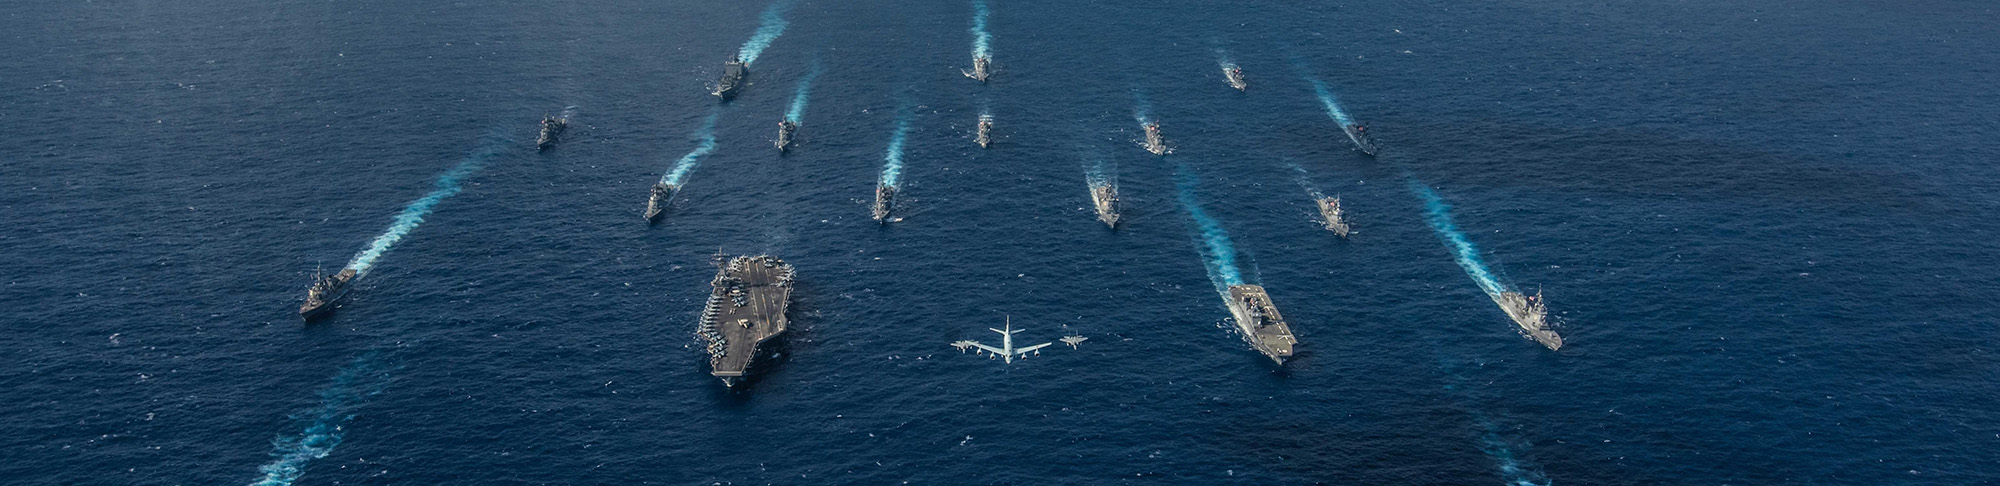 Battle group of Naval ships and planes